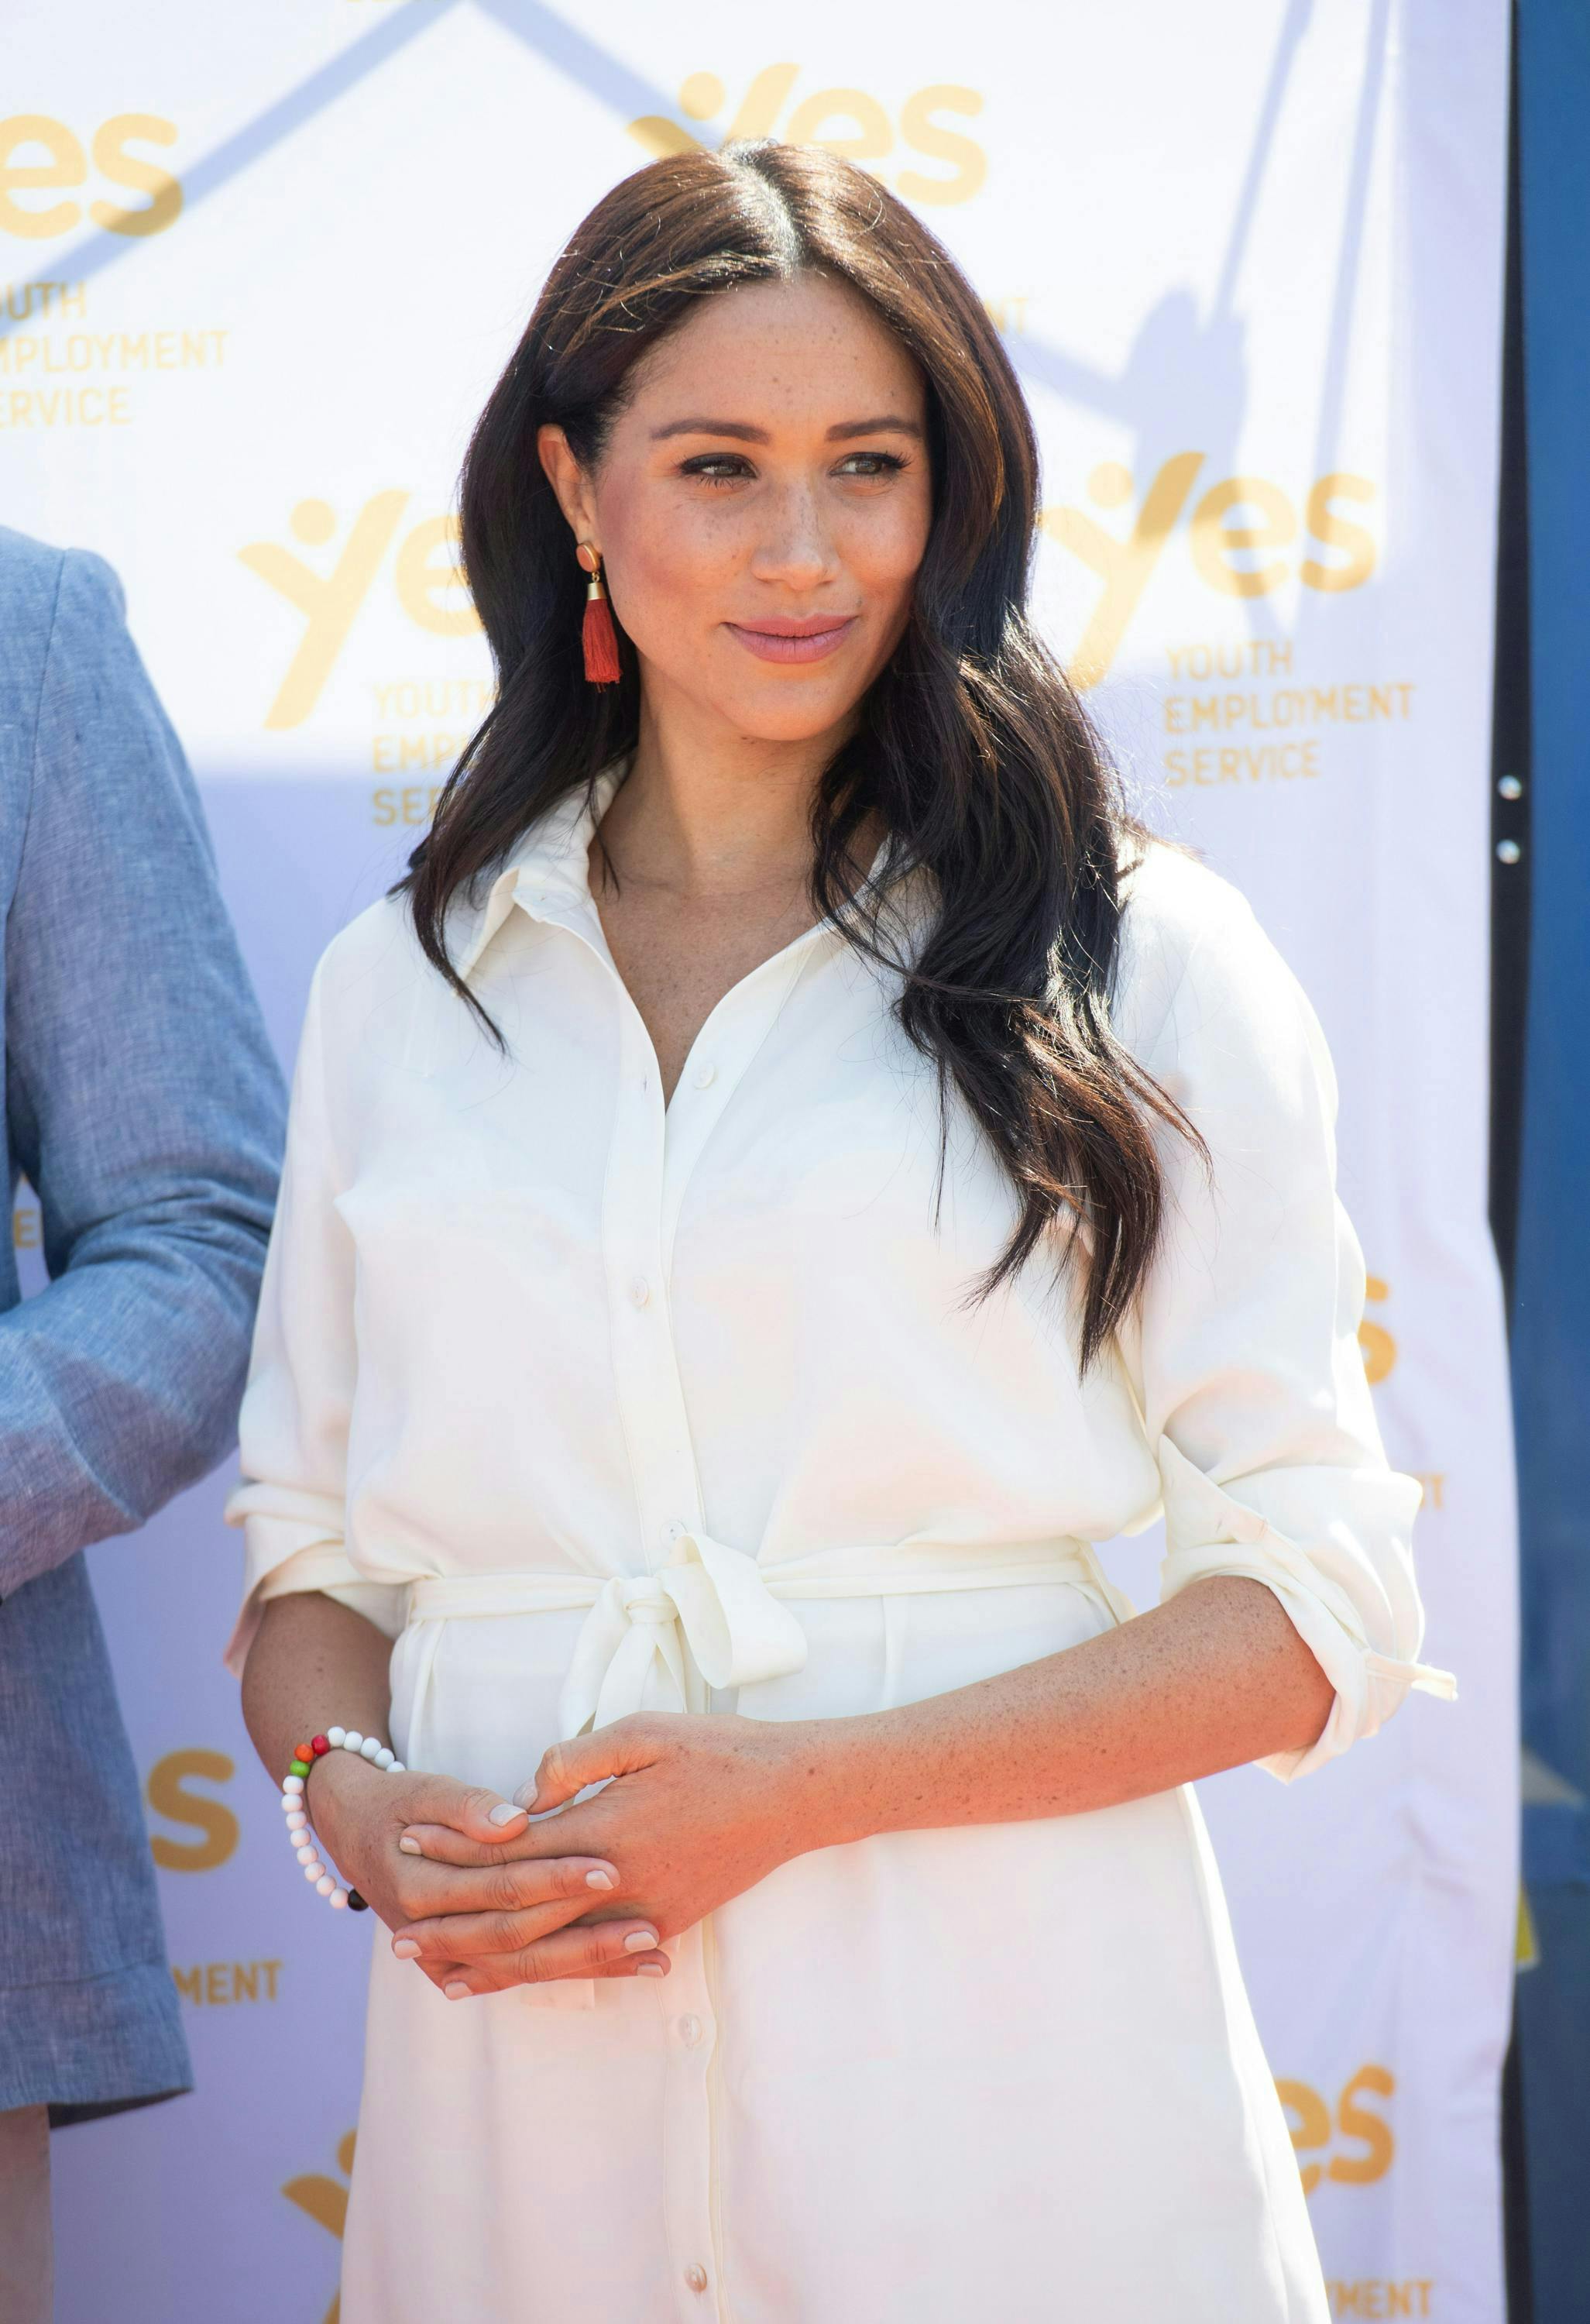 Meghan Markle visited the Tembisa Township to learn about Youth Employment Services during their royal tour of South Africa. Photo courtesy of Getty Images.